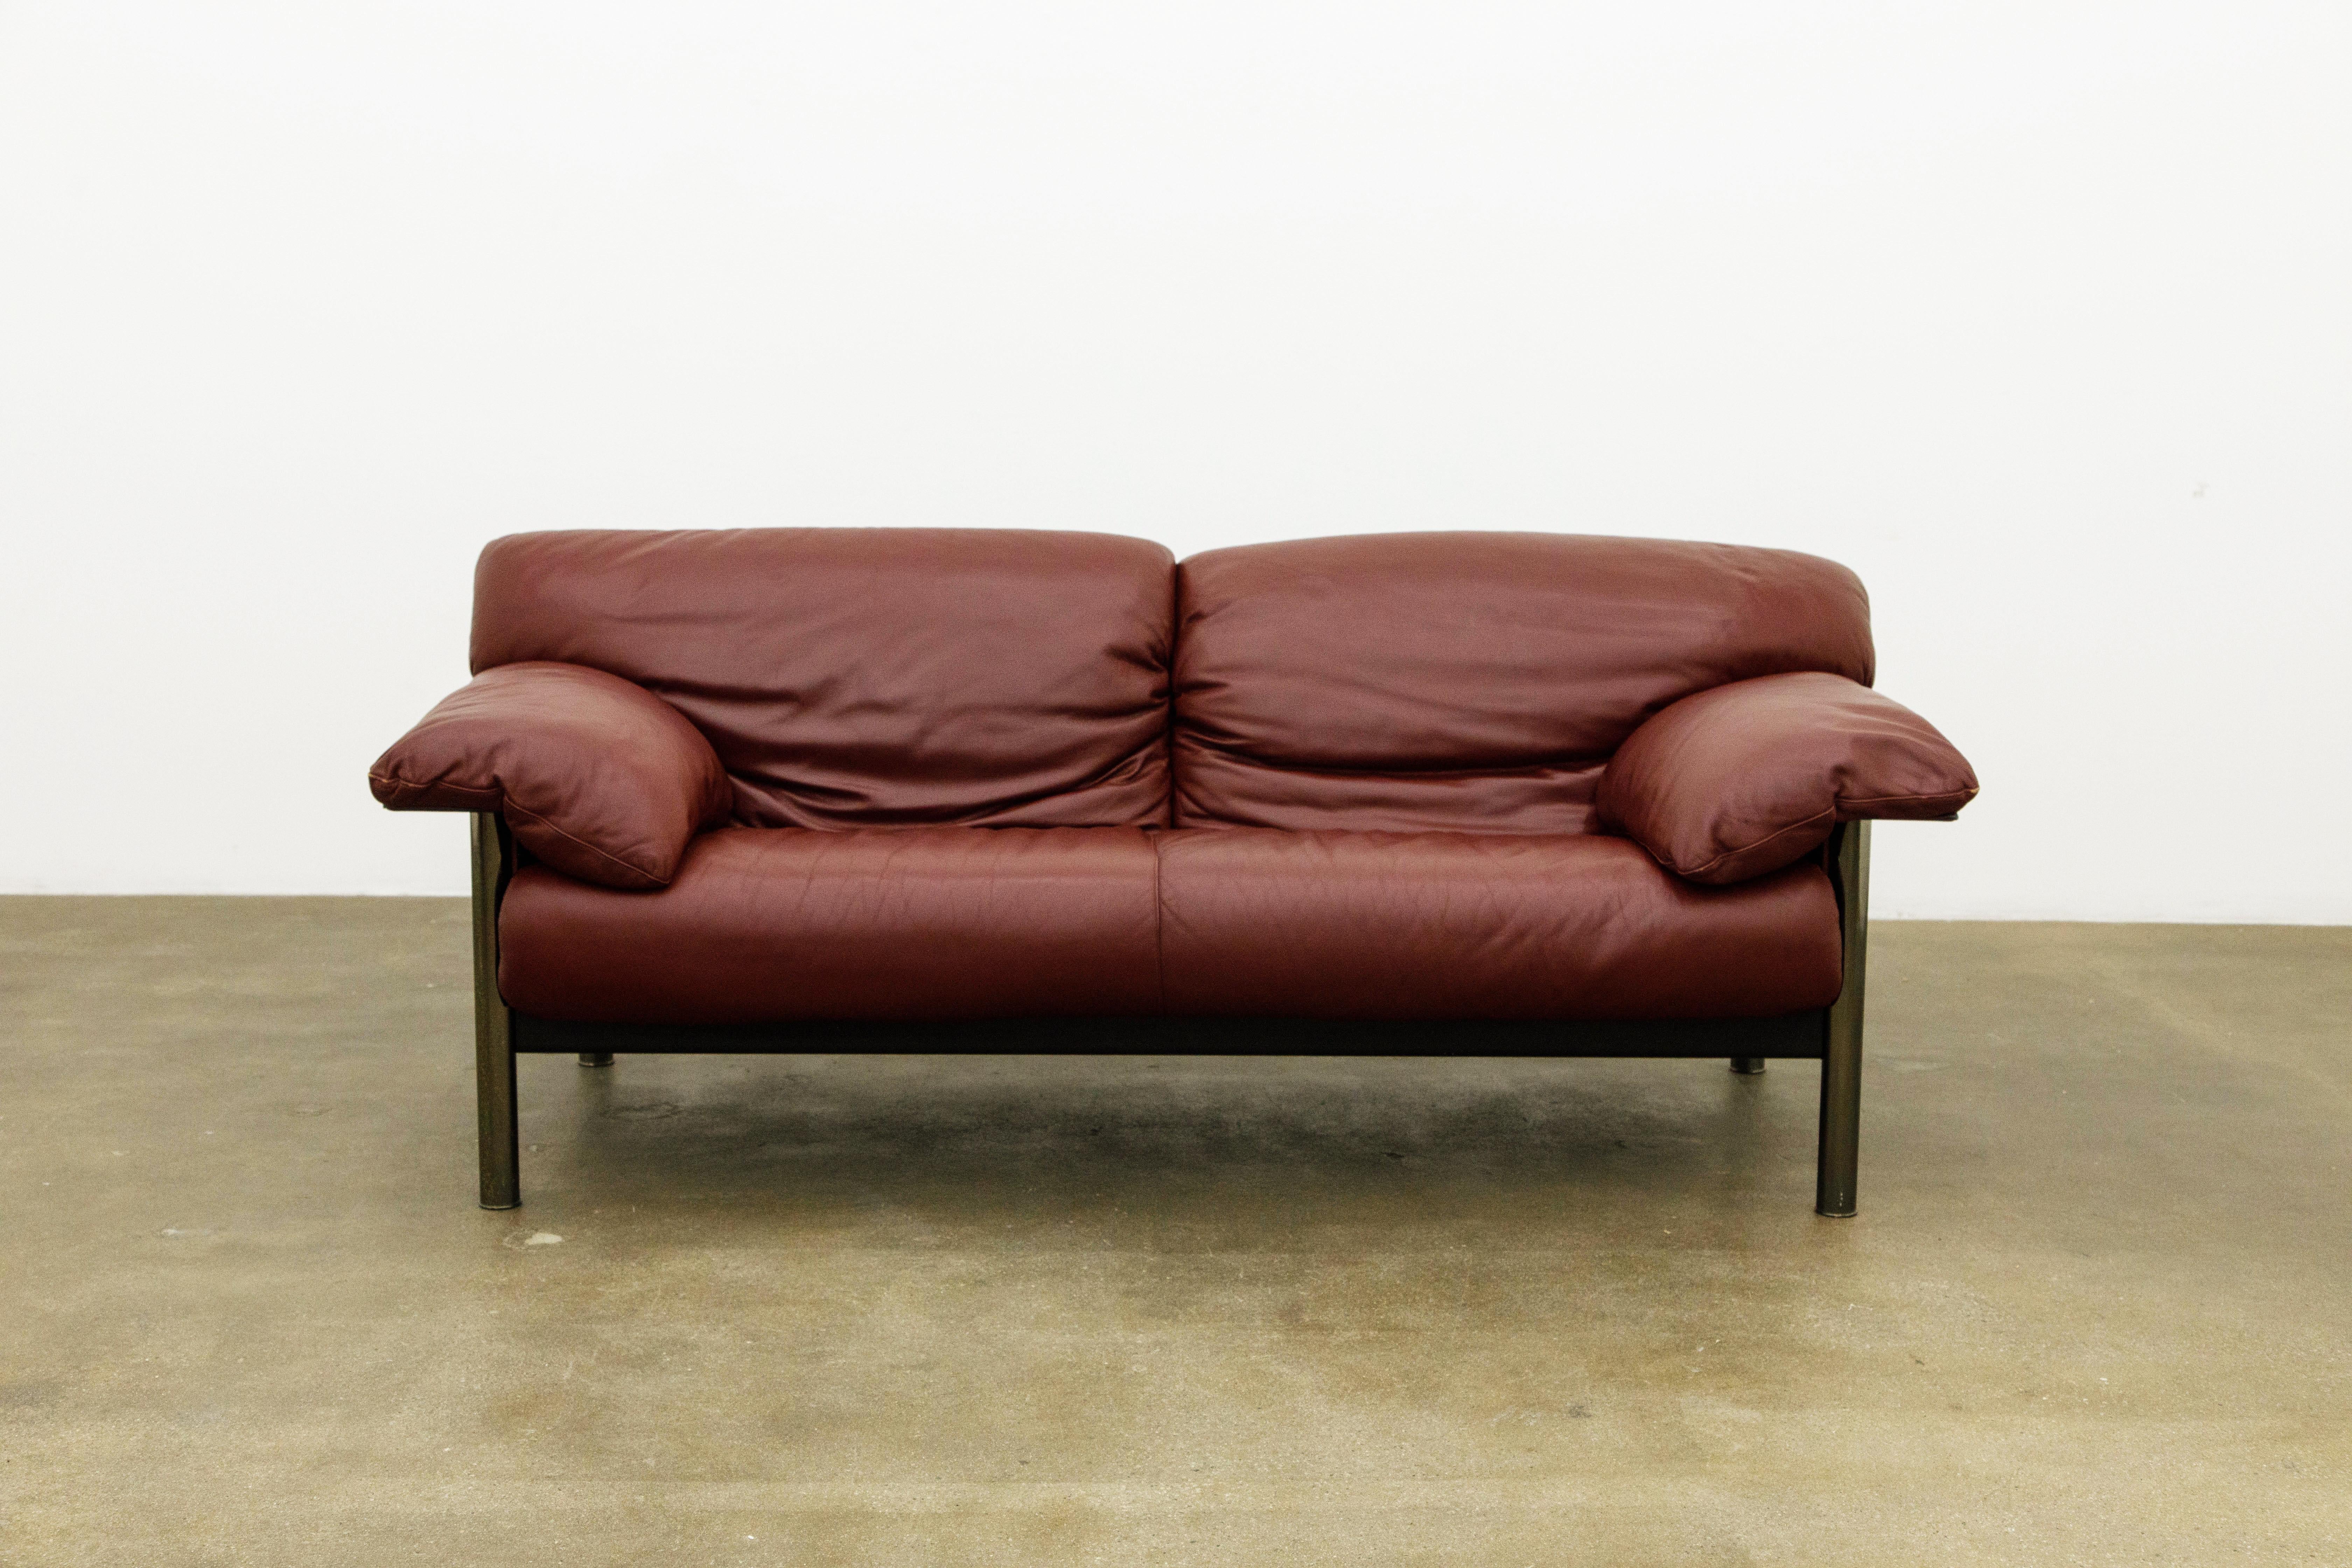 The burgundy leather is incredible on this Poltrona Frau circa 1990 Post-Modern sofa by Pierluigi Cerri. Featuring soft and supple Italian leather cushions over a ribbed leather wrapped (over steel) frame with smoked chrome legs, the rear has a